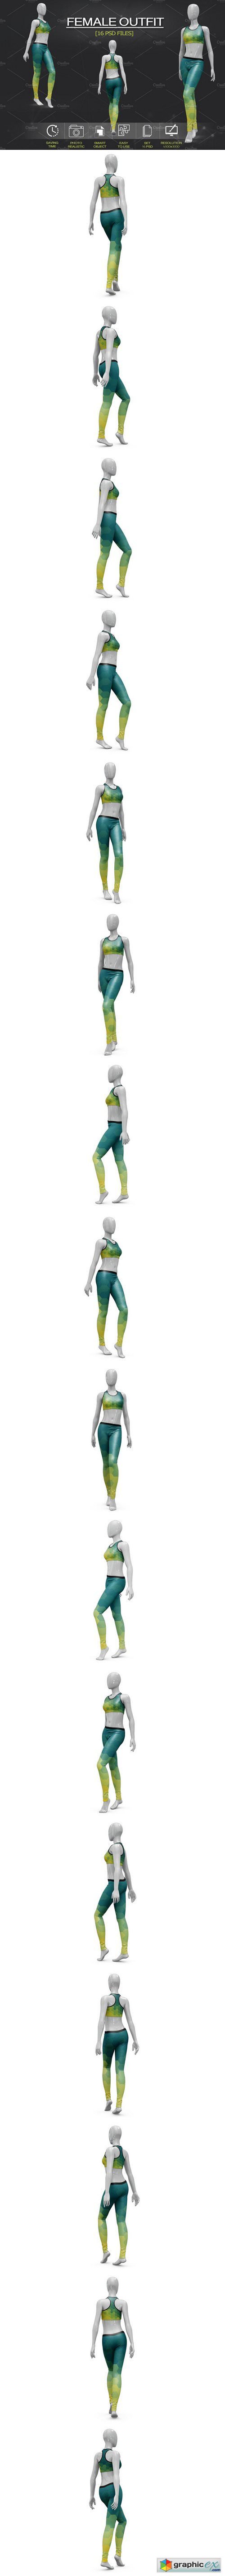 Female Sport Outfit Vol.1 Mockup